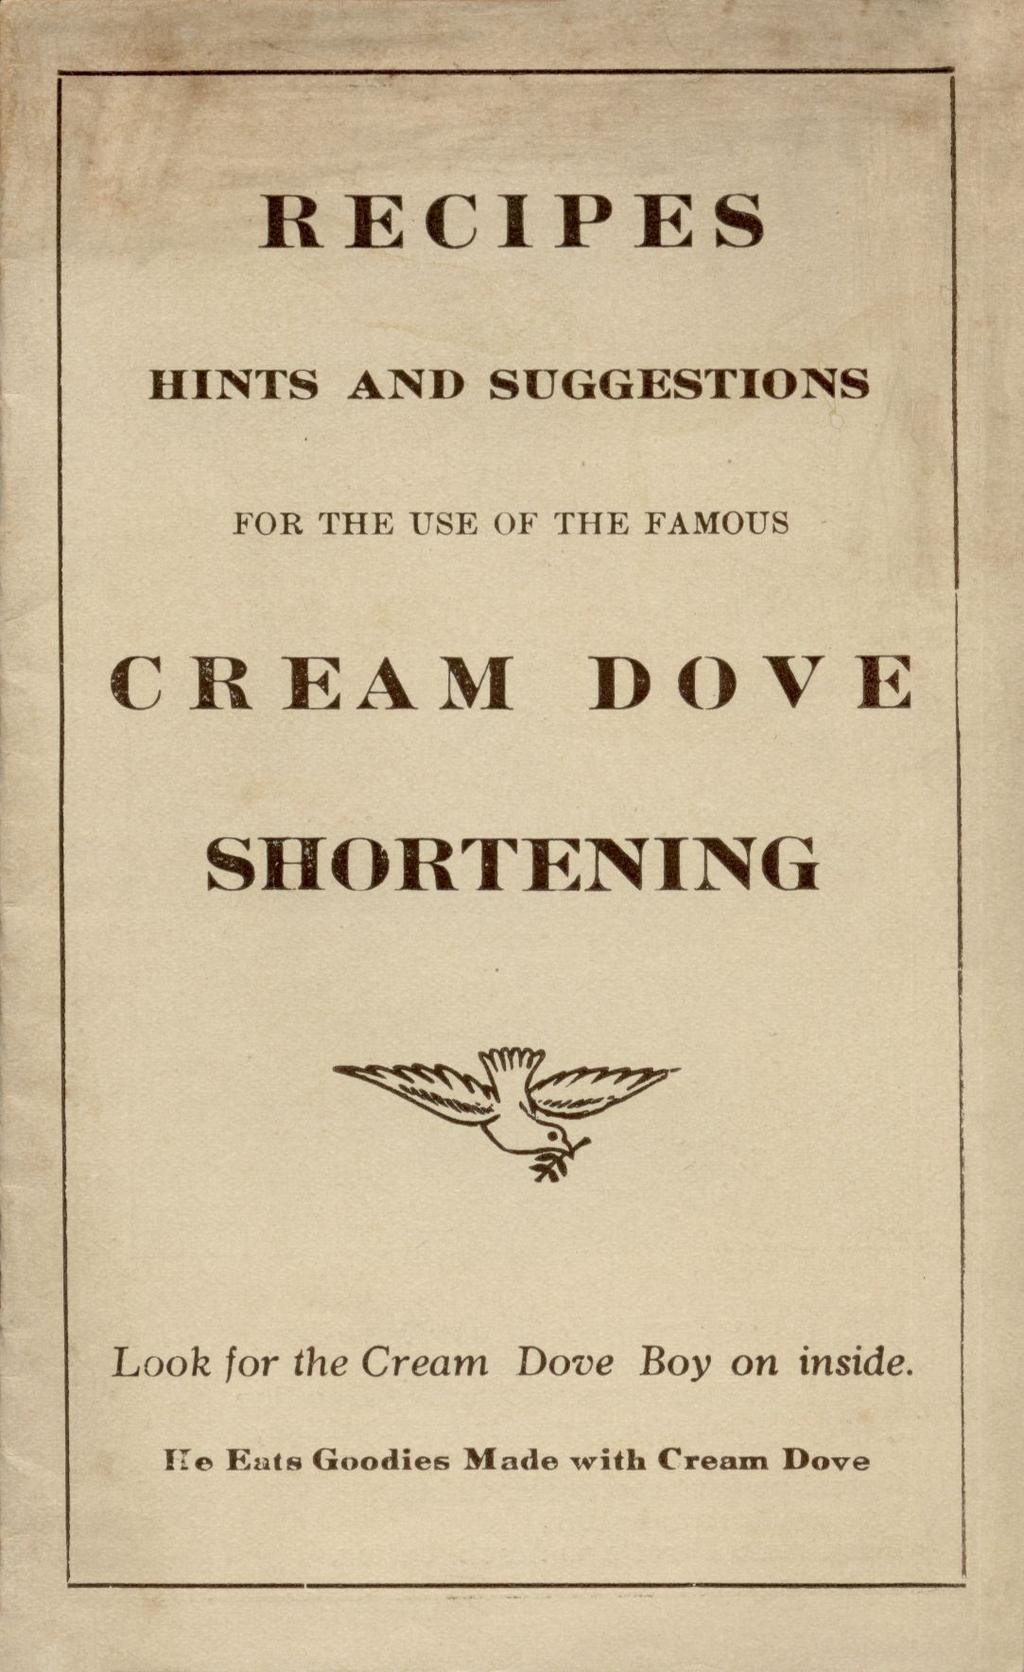 RECIPES HINTS AND SUGGESTIONS FOR THE USE OF THE FAMOUS CREAM DOVE